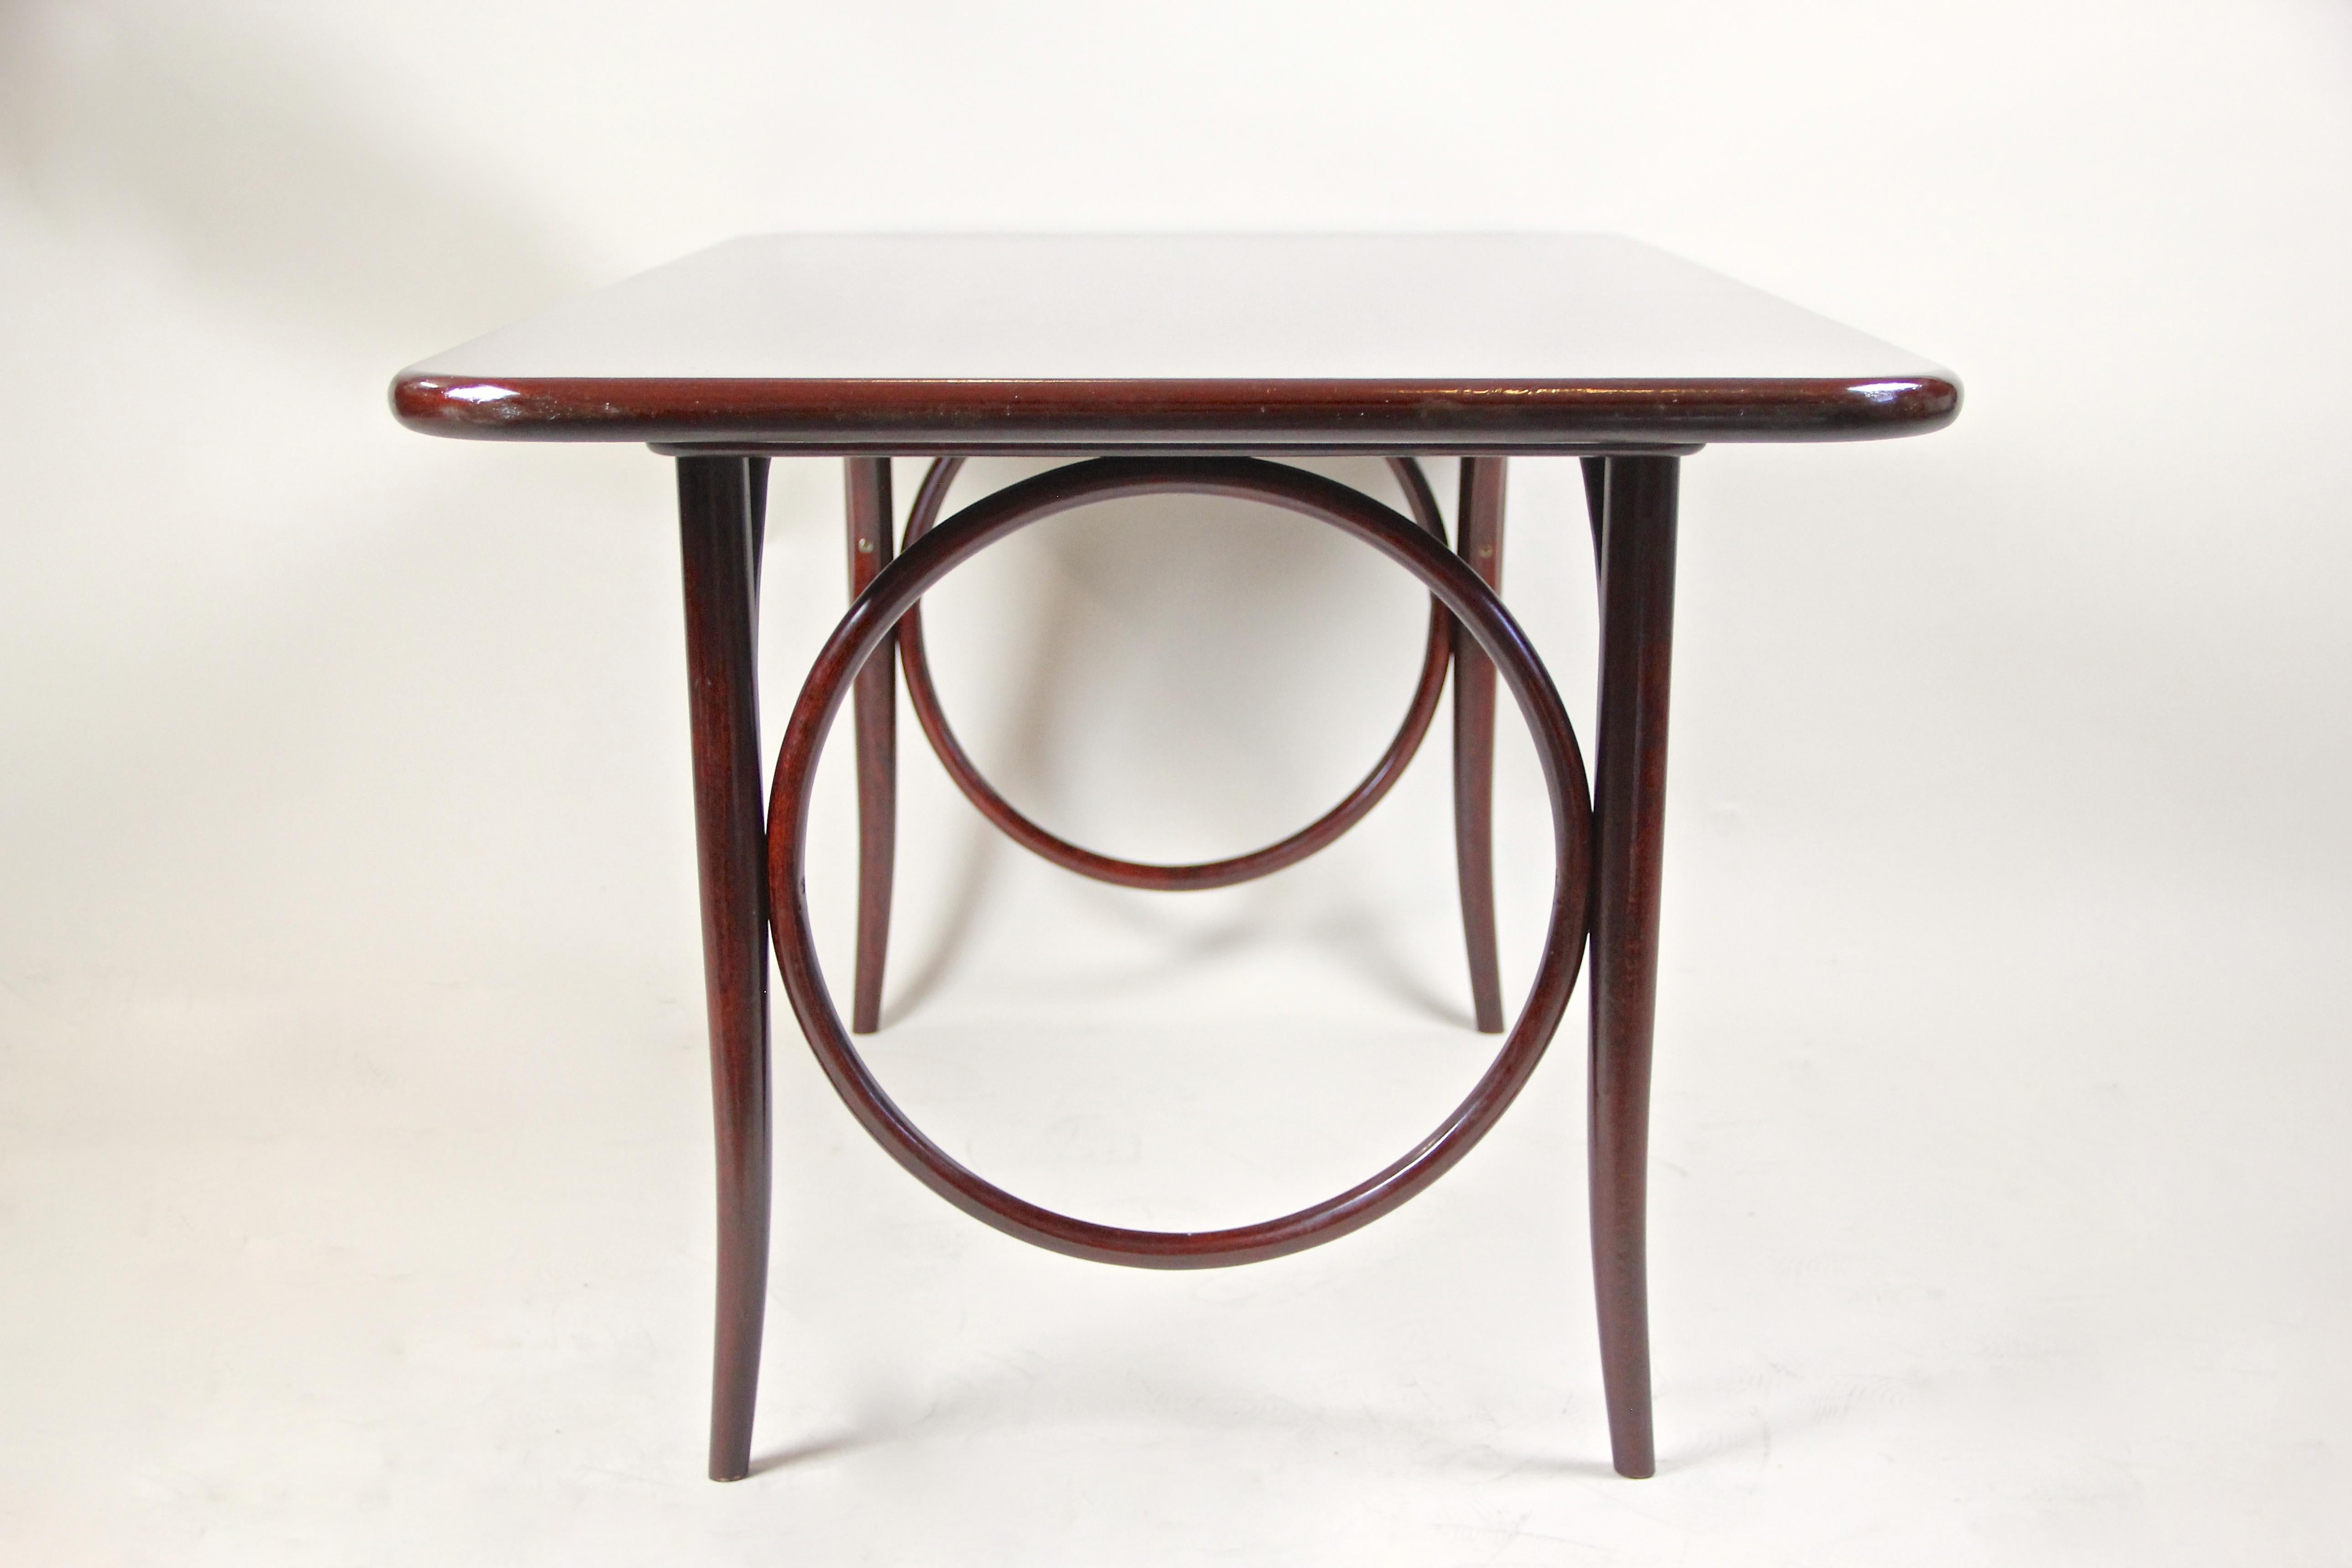 Vintage Thonet Sofa Table with Ring Design, Austria, circa 1970 For Sale 2